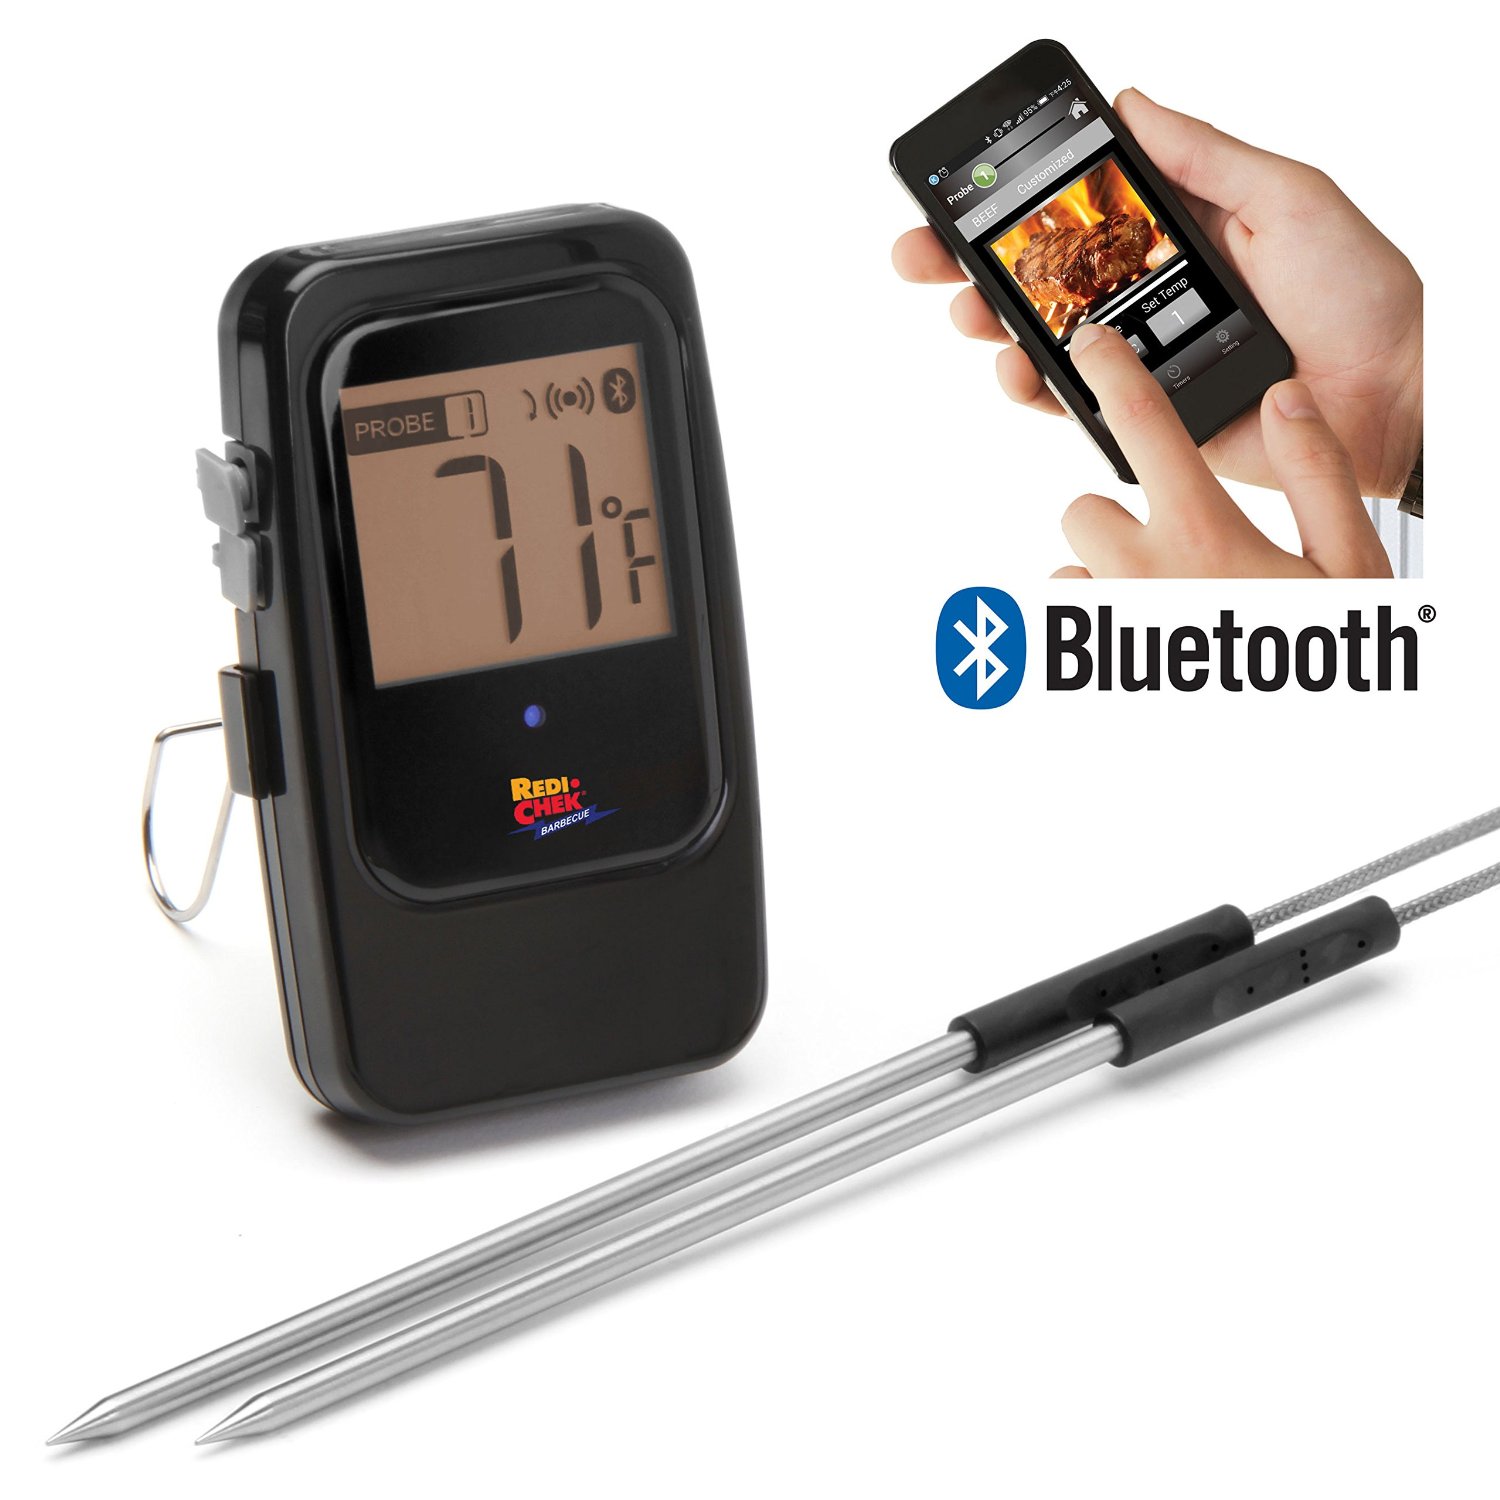 Hybrid Wi-Fi & Bluetooth Grilling and Smoking Thermometer